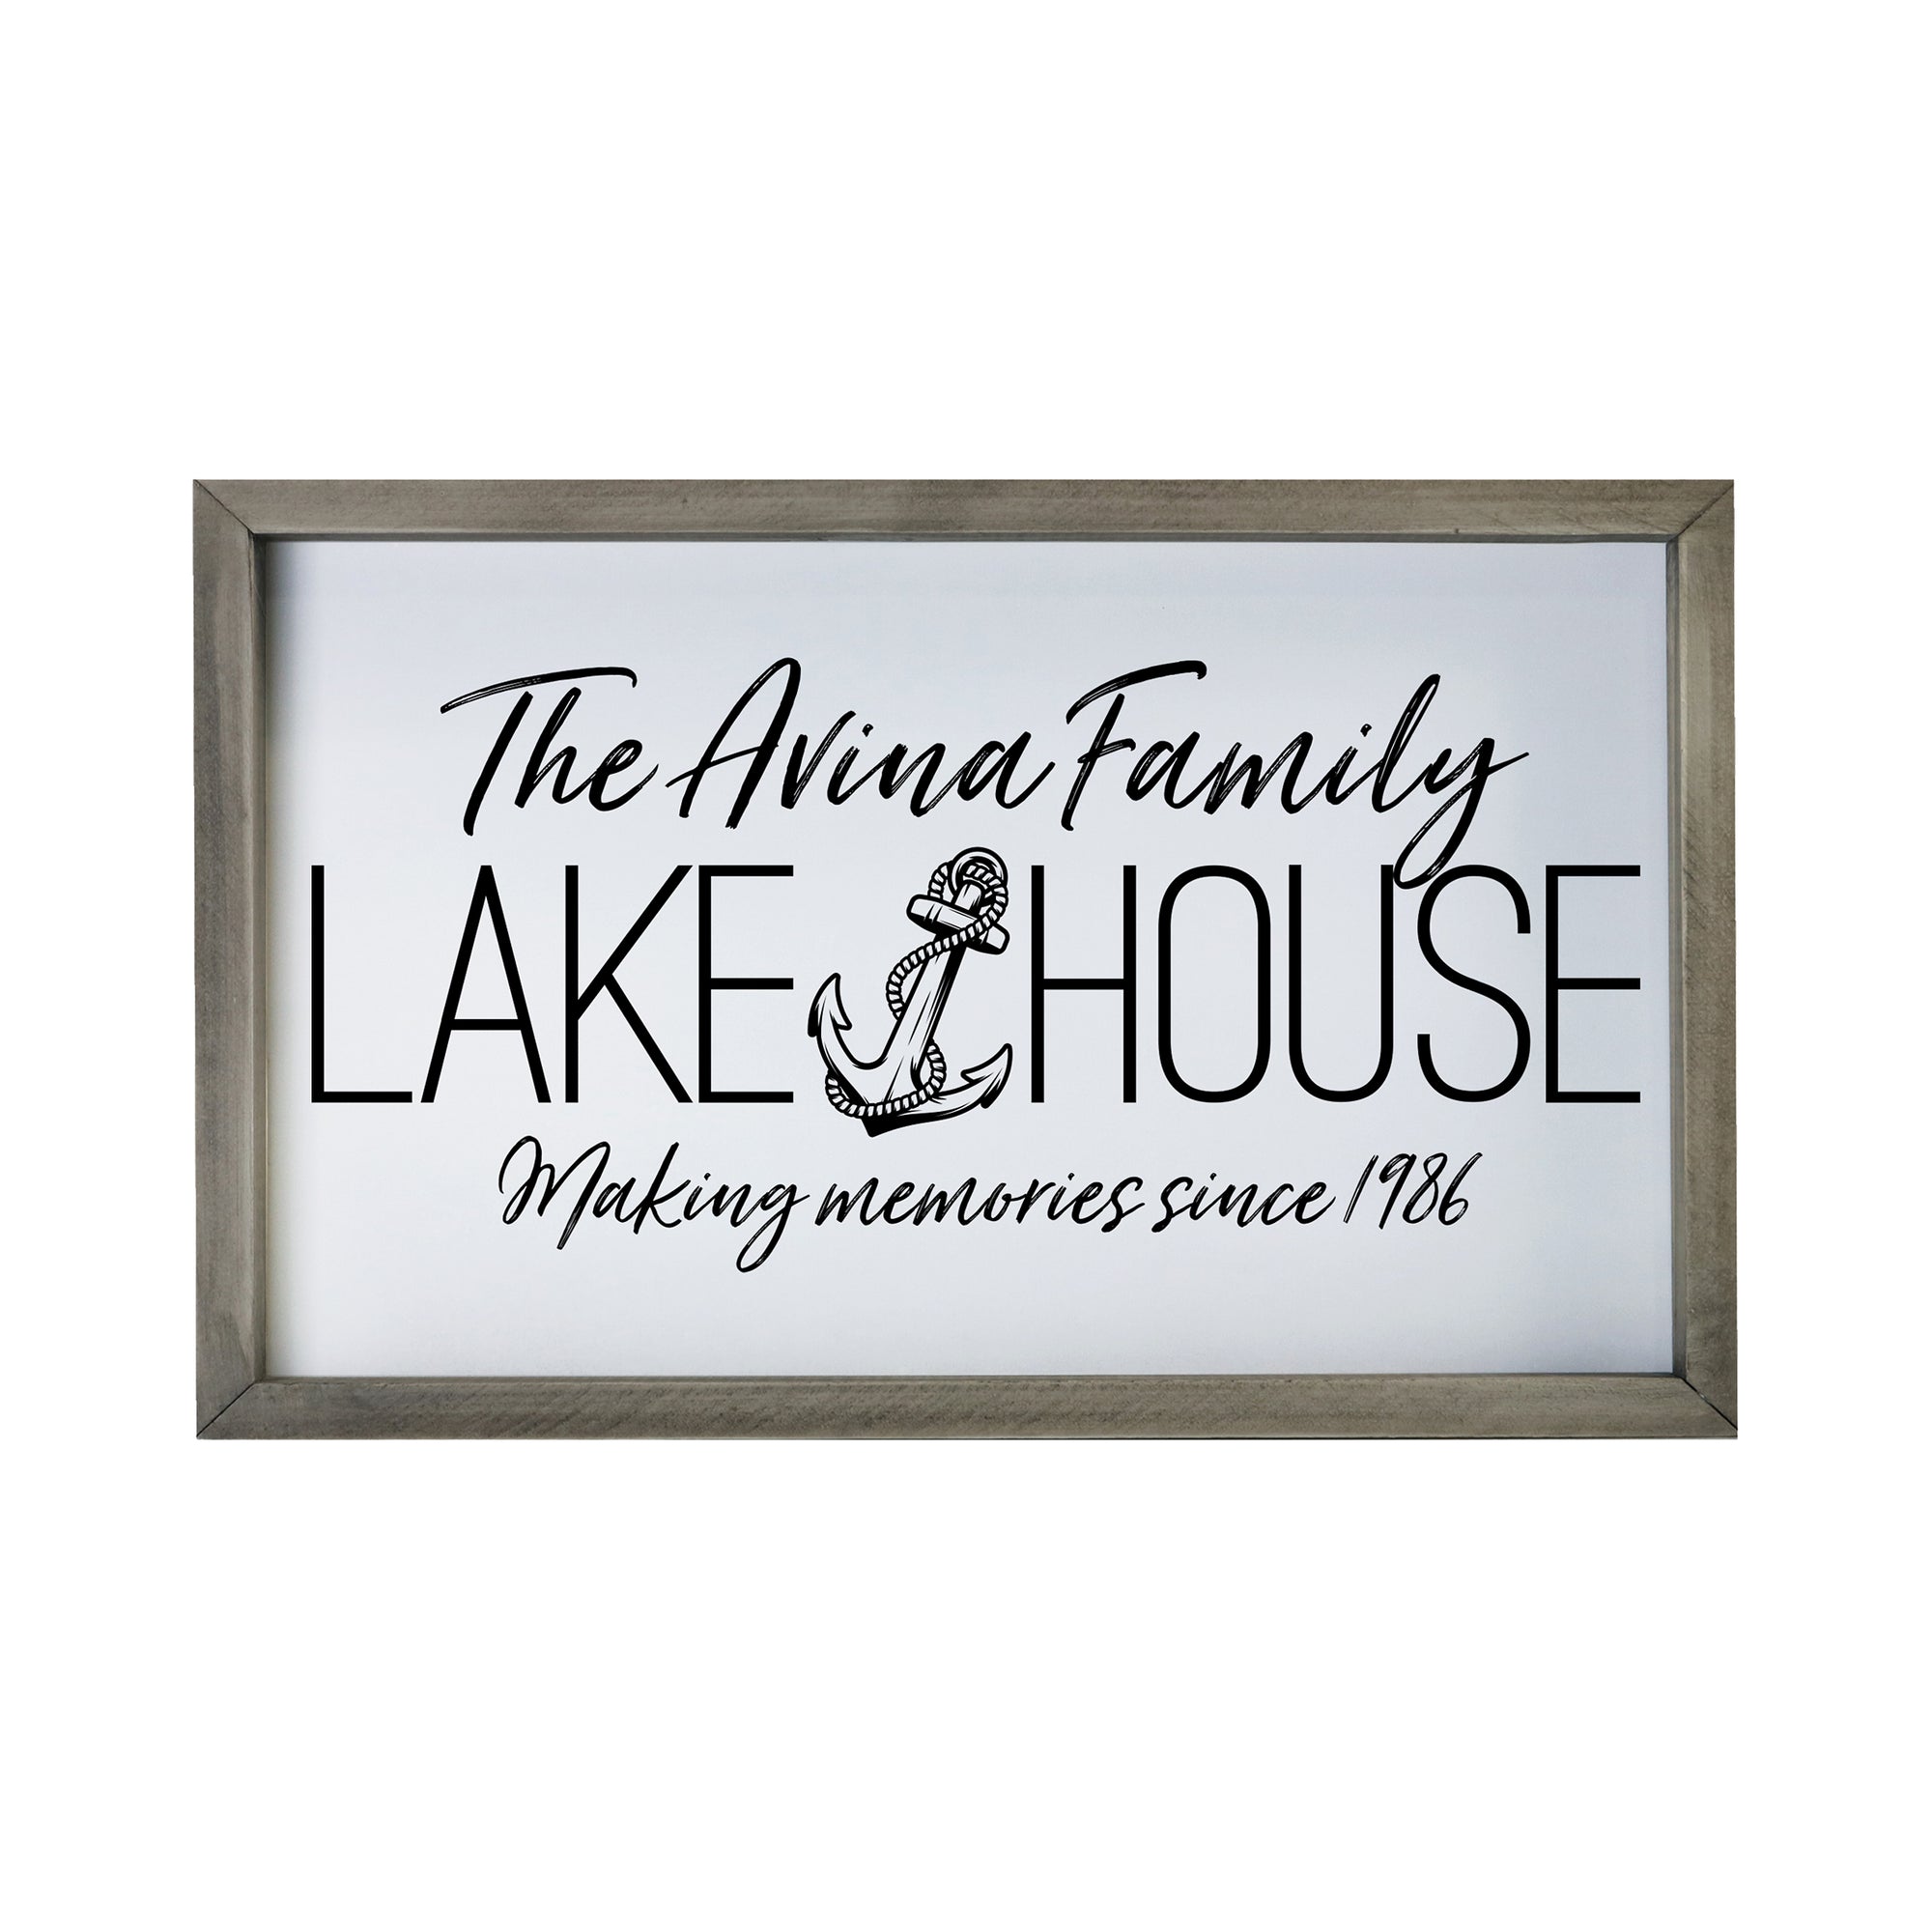 LifeSong Milestones Personalized Home Inspirational Framed Shadow Box The Lake House Making Memories (Anchor) Gift for Parents, Couples Christian Wall Decor for Husband, Wife Housewarming Gift Table and Shelf Sitters 12x18